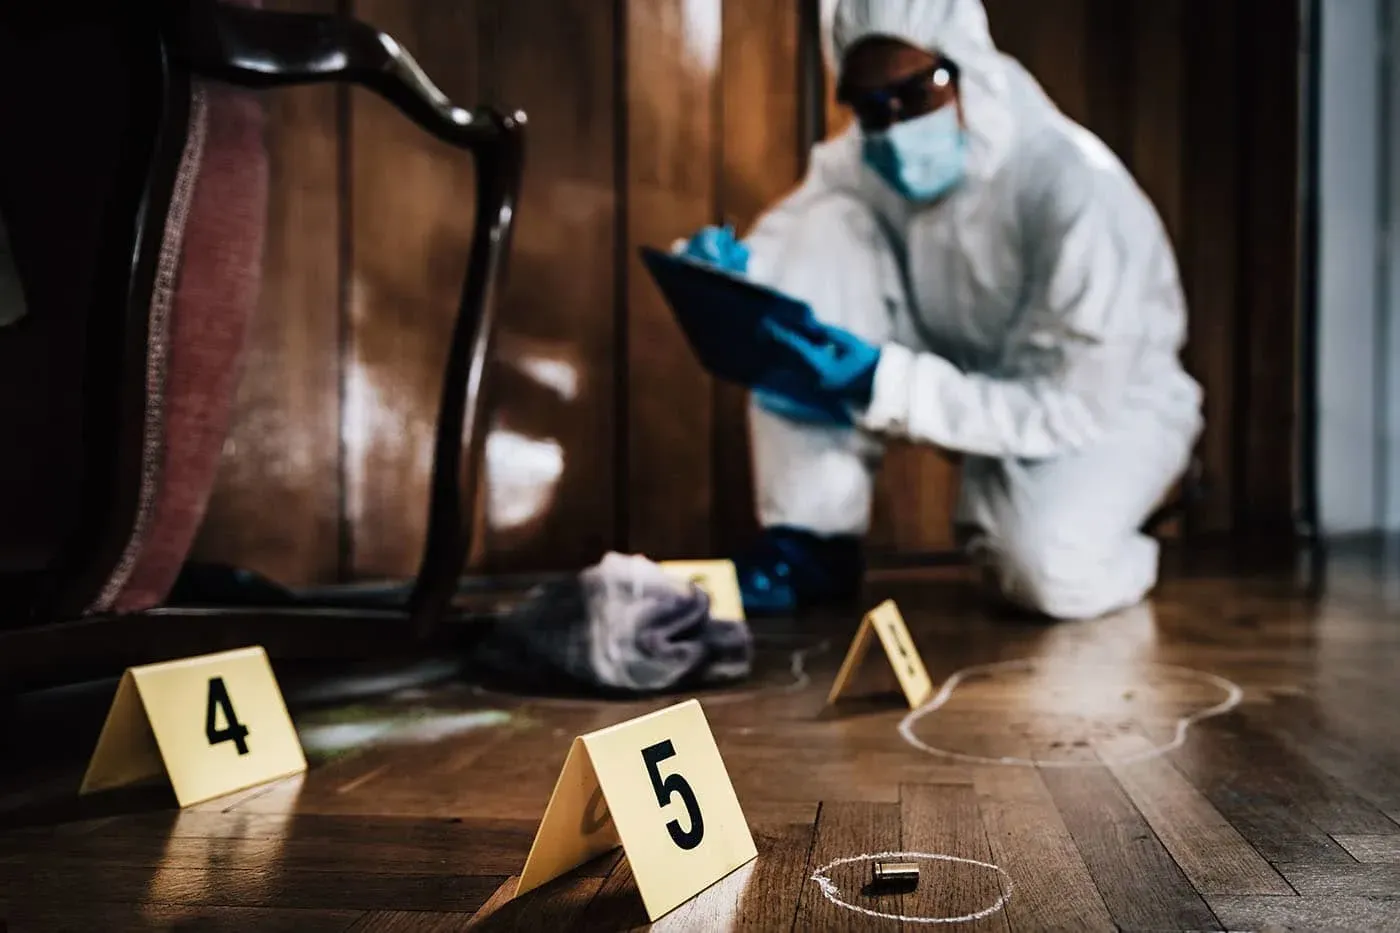 A person in white suit and blue gloves investigating a room.